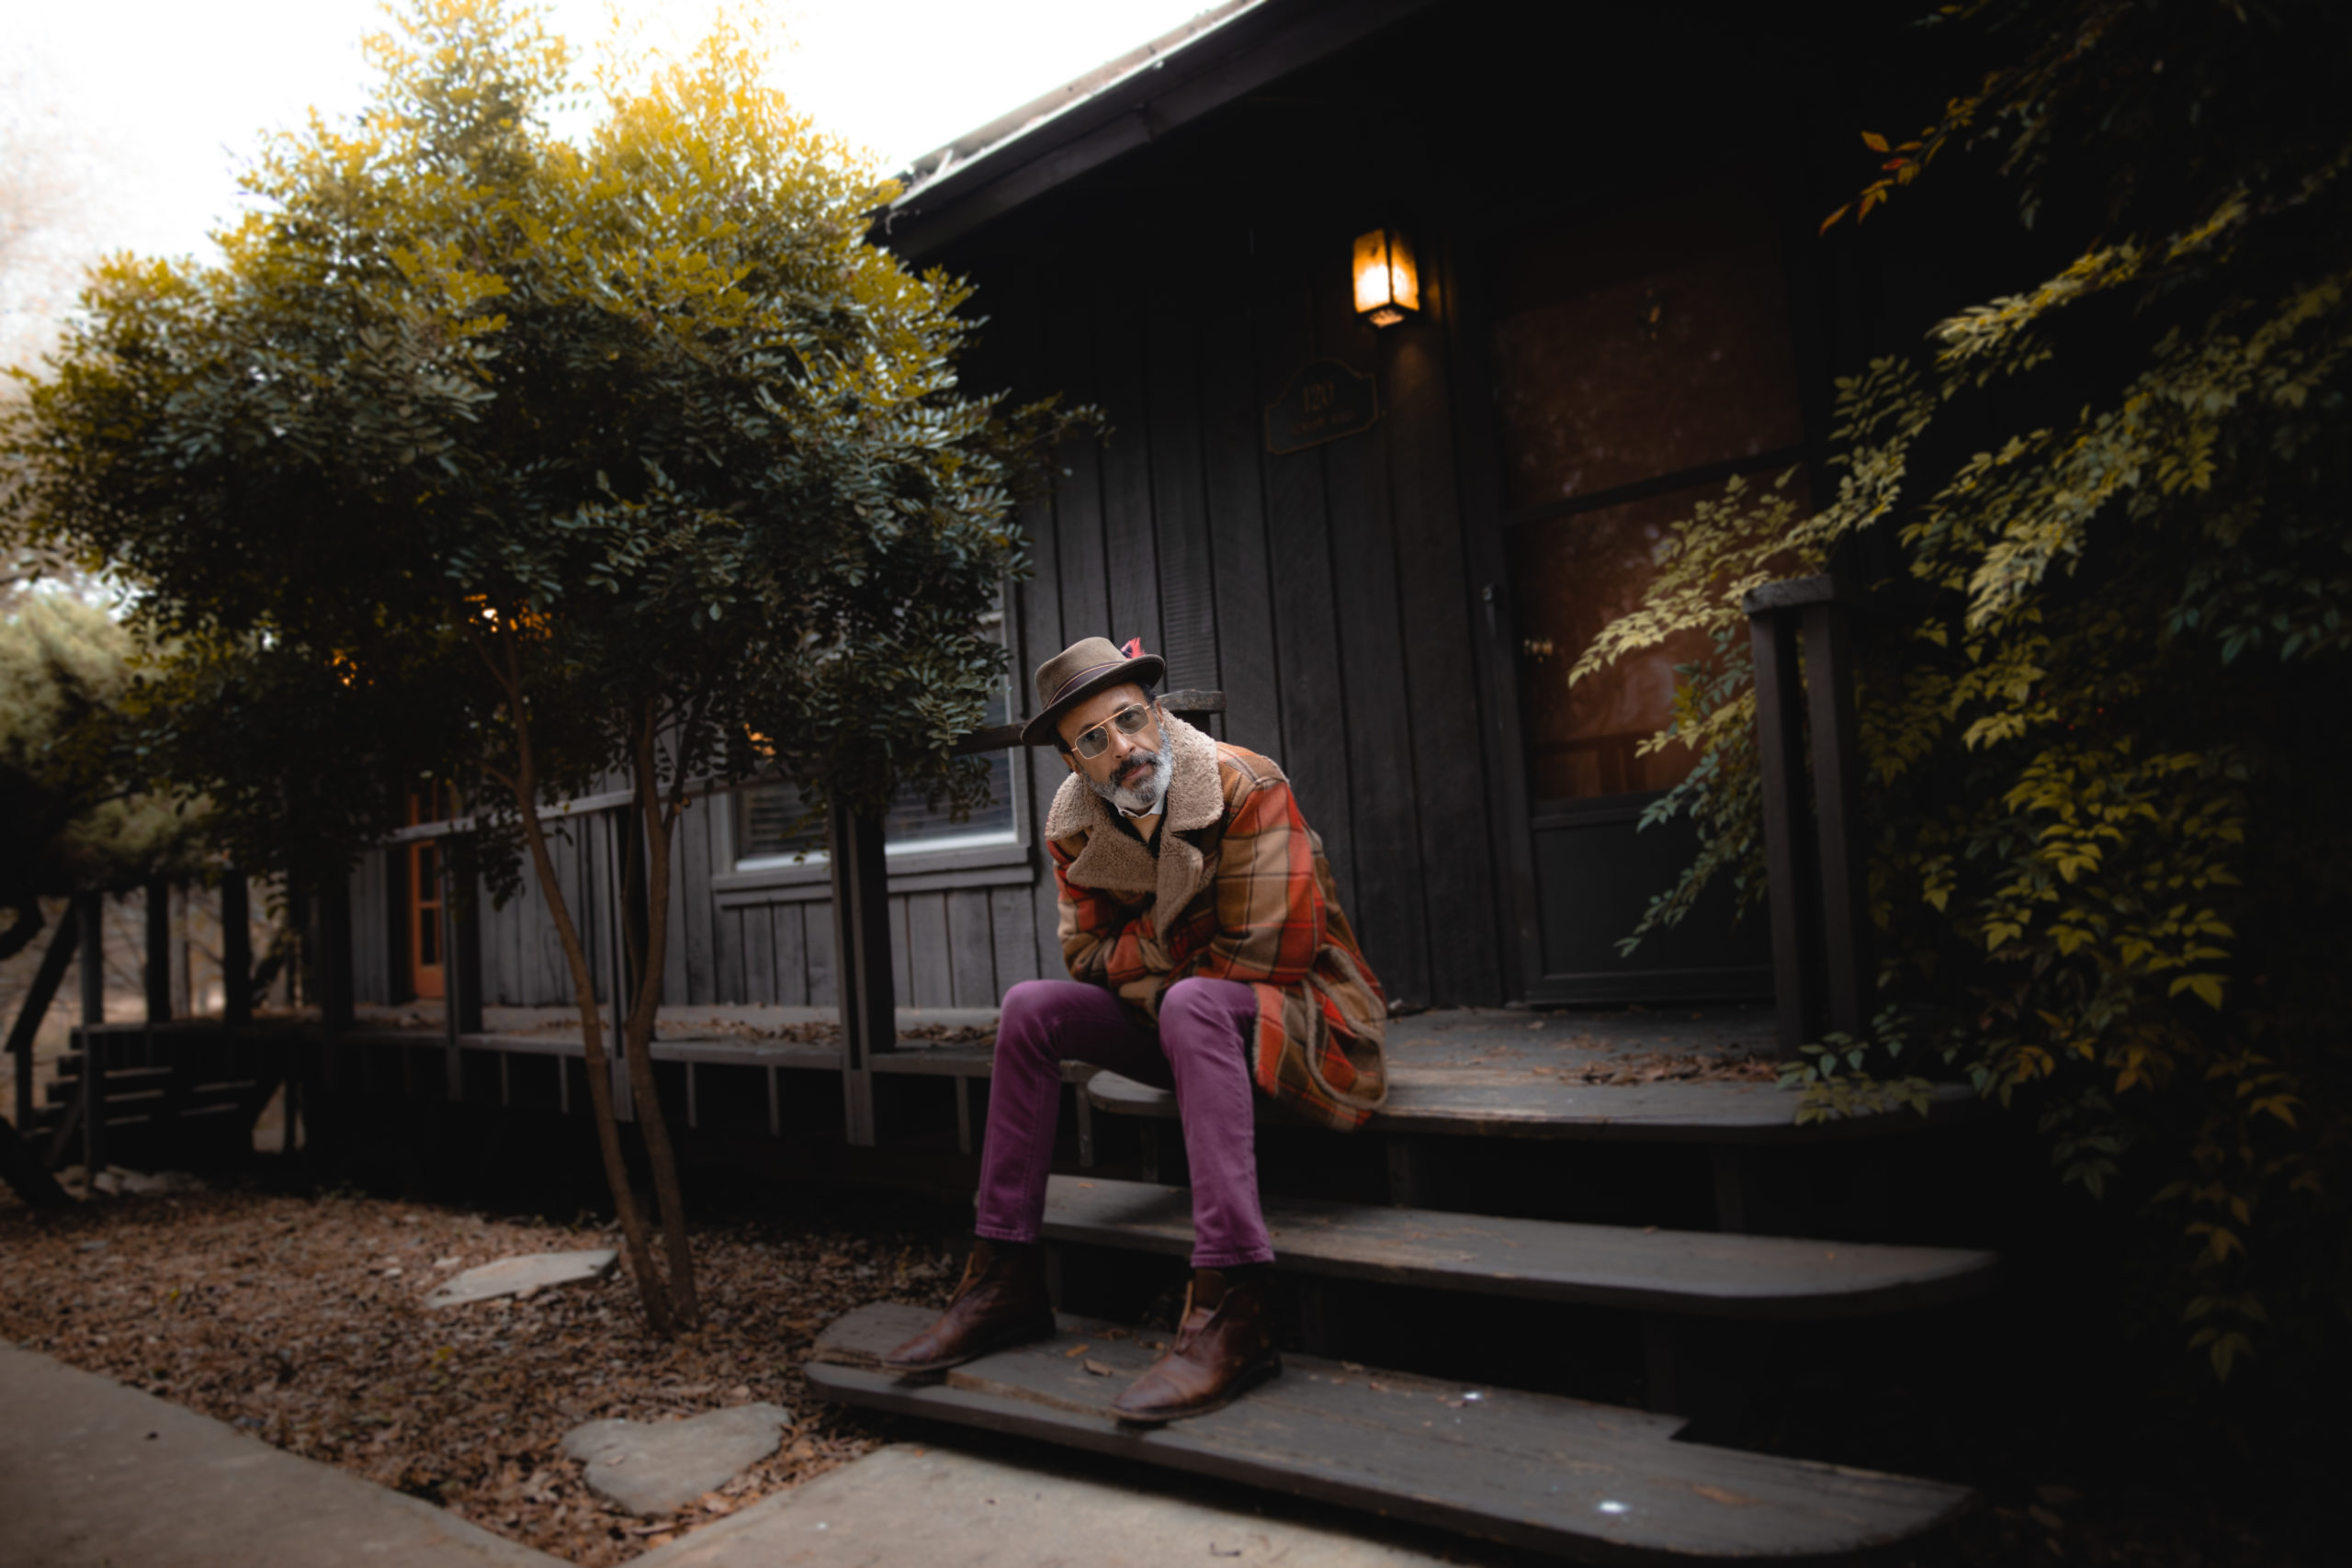 Song Premiere: The Reverend Shawn Amos “I’m Ready”